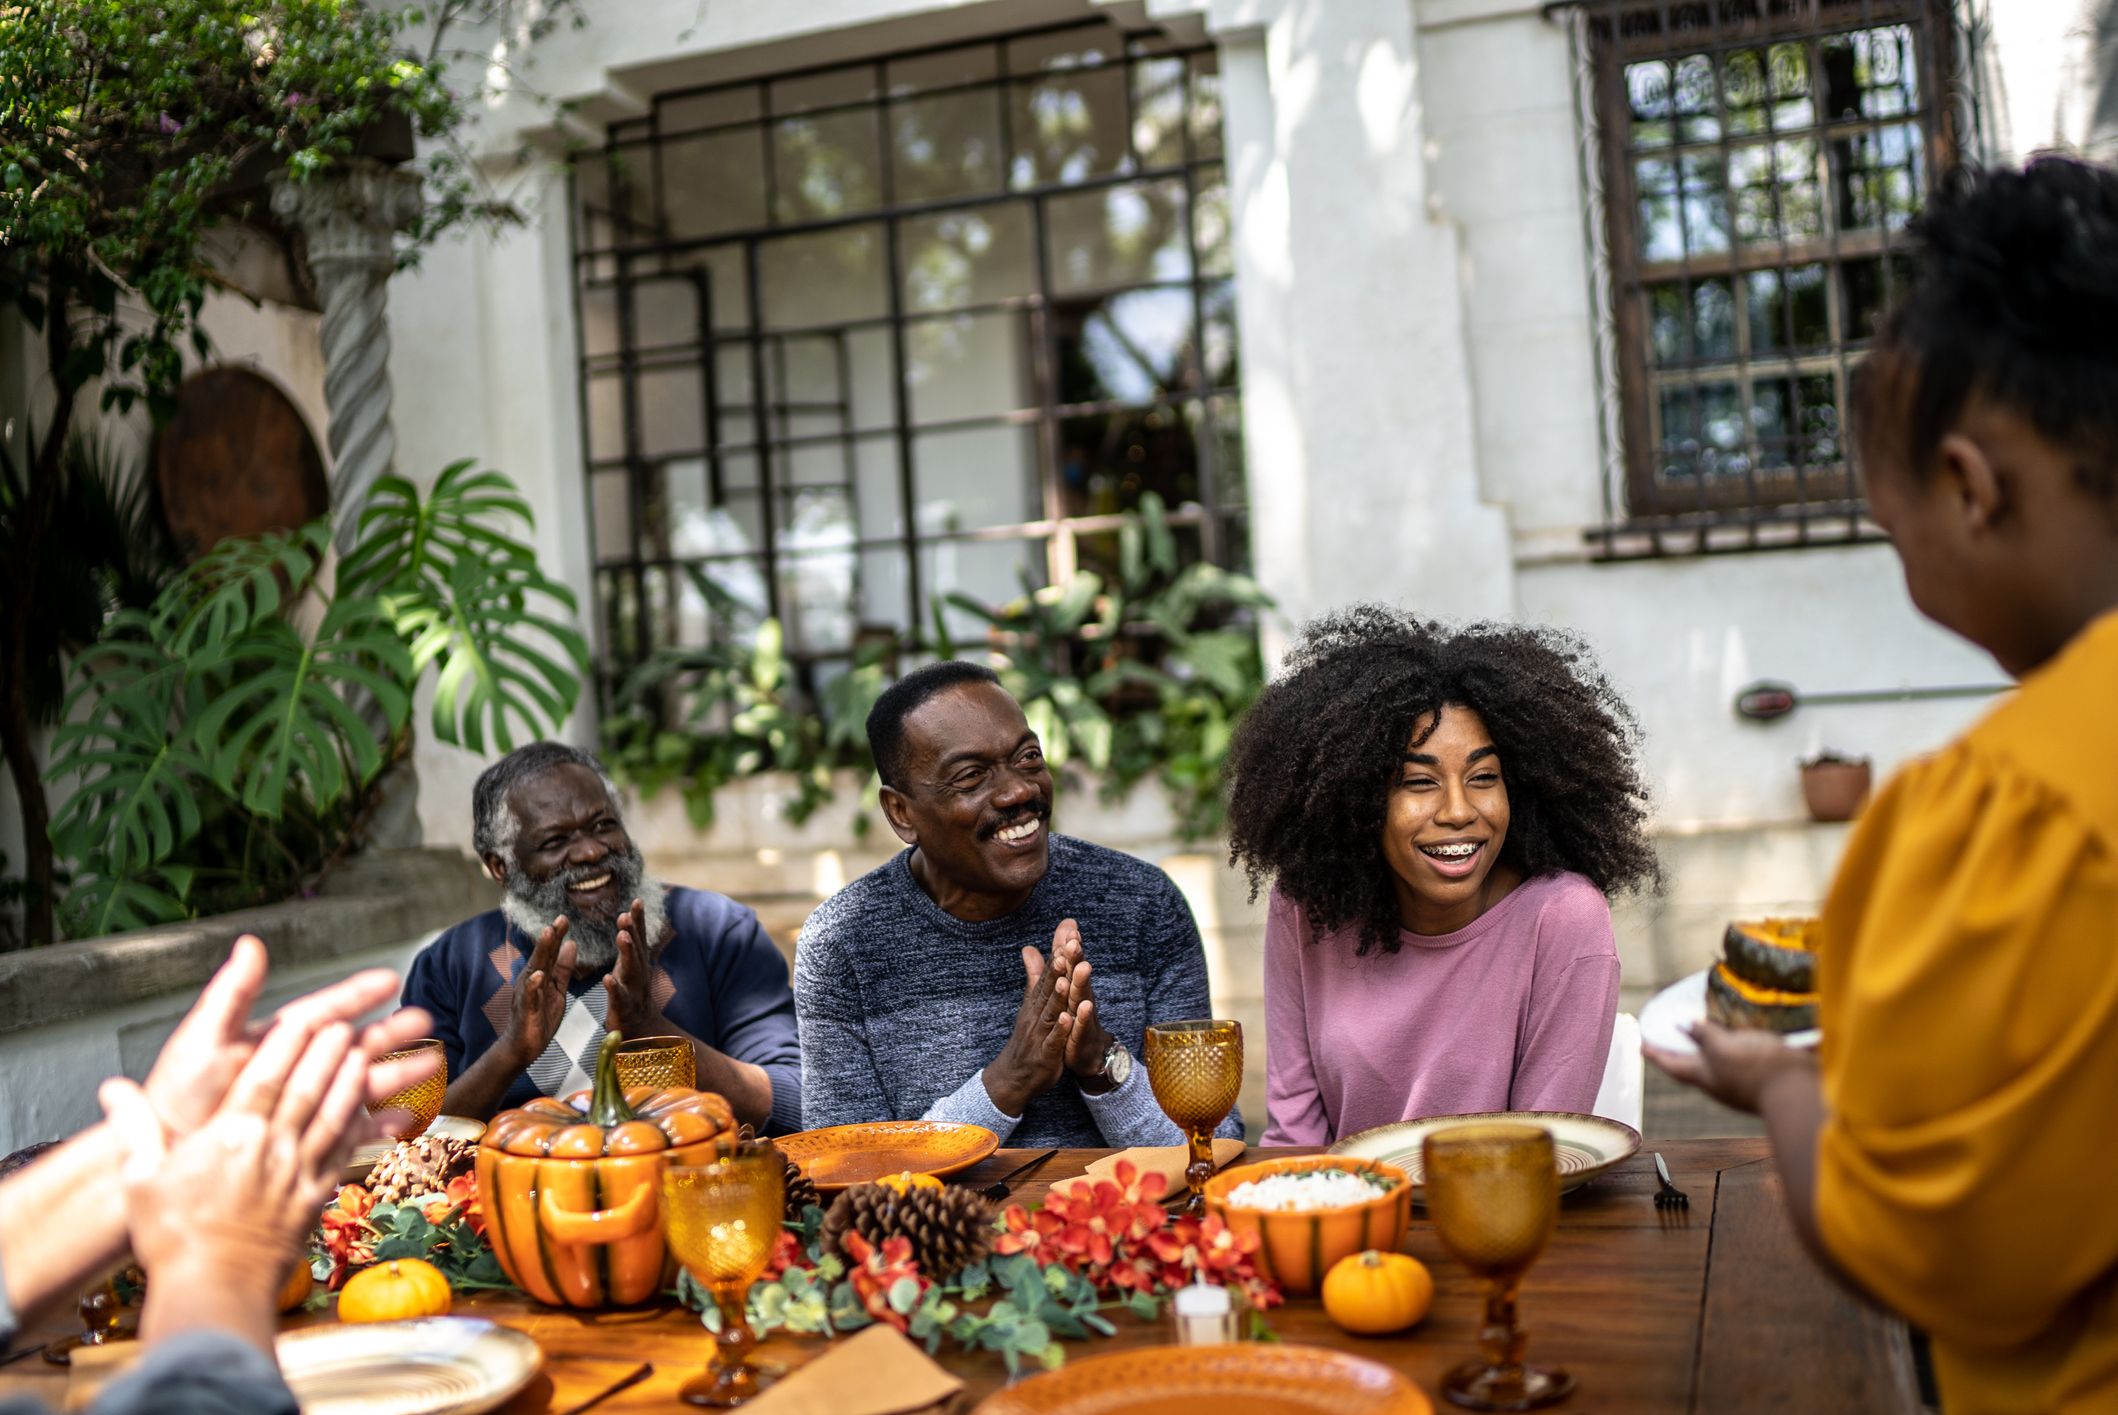 Survey Finds Nearly 1 in 2 Americans Will Celebrate Friendsgiving